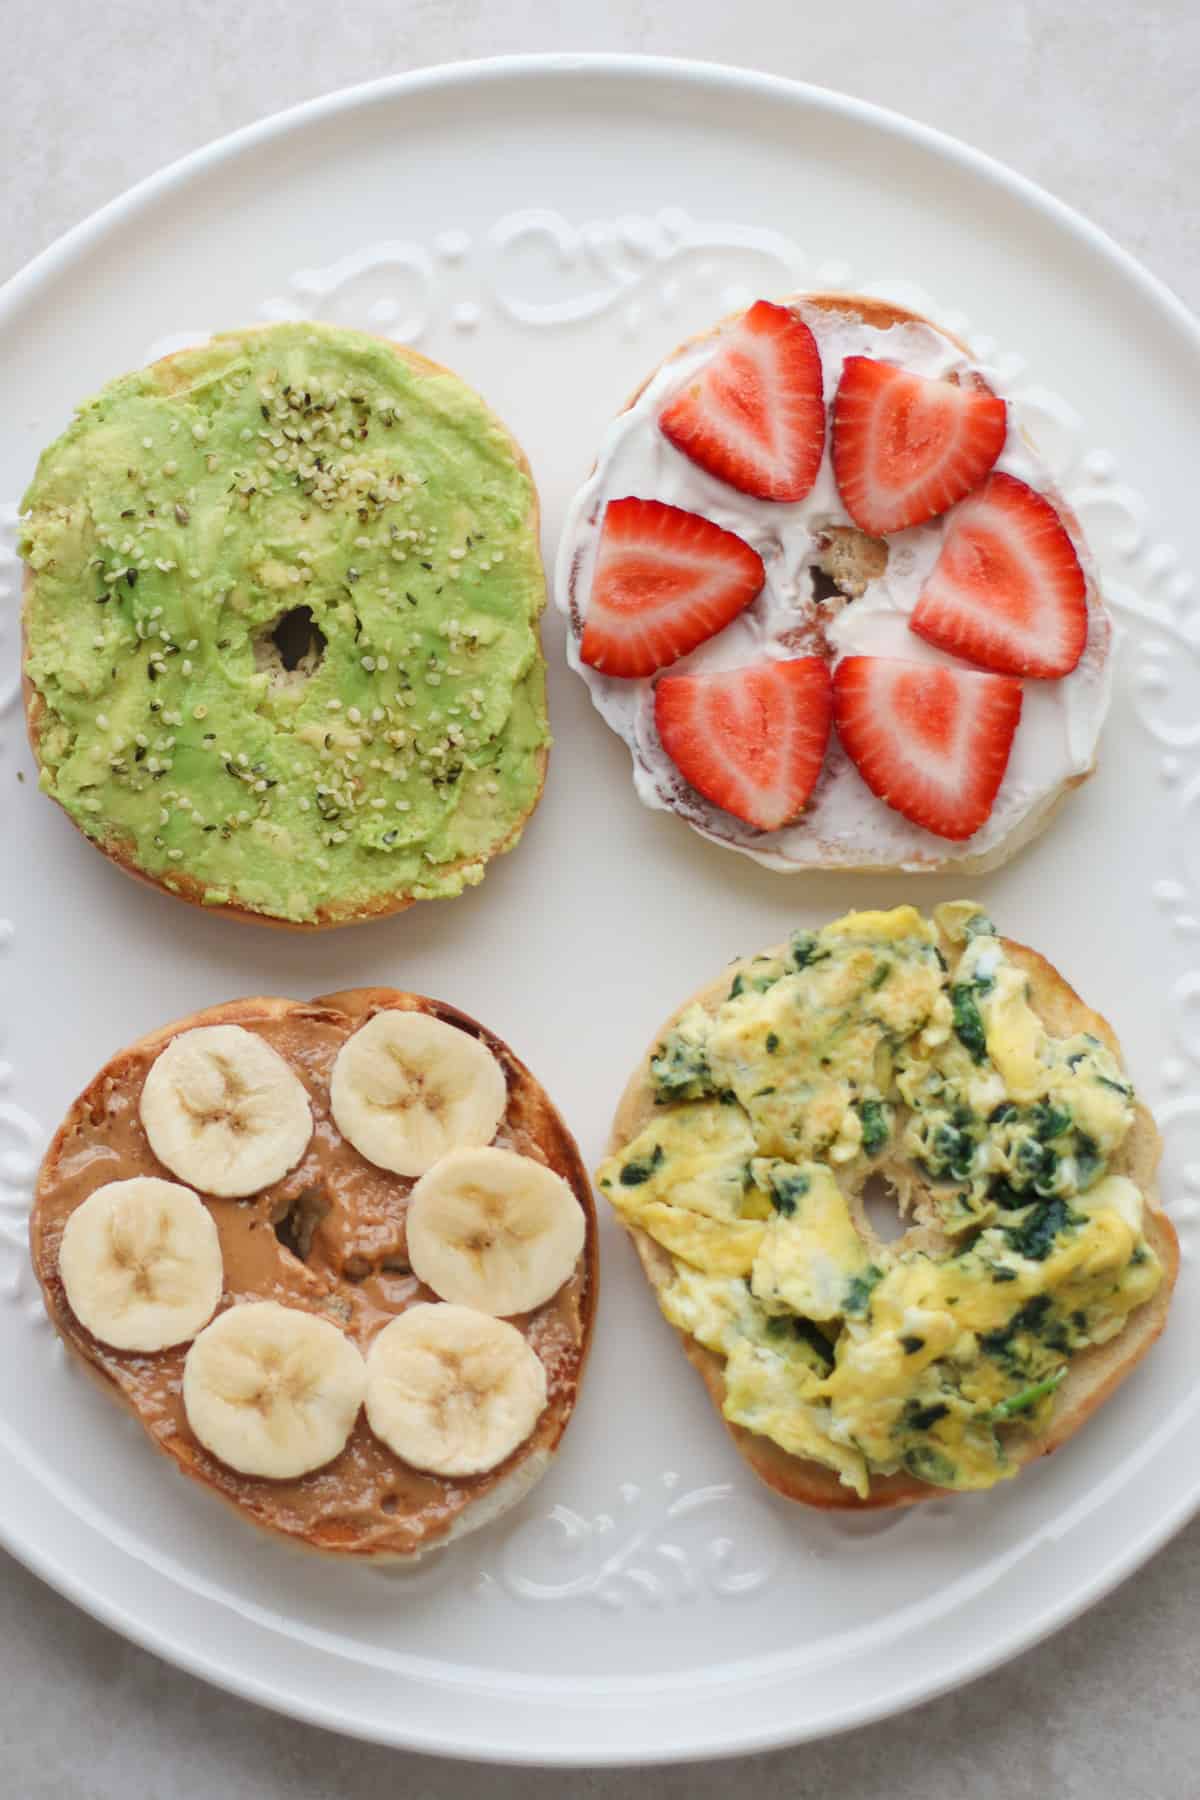 Four bagels with different toppings - avocado, peanut butter with banana, scrambled eggs, yogurt and strawberries.